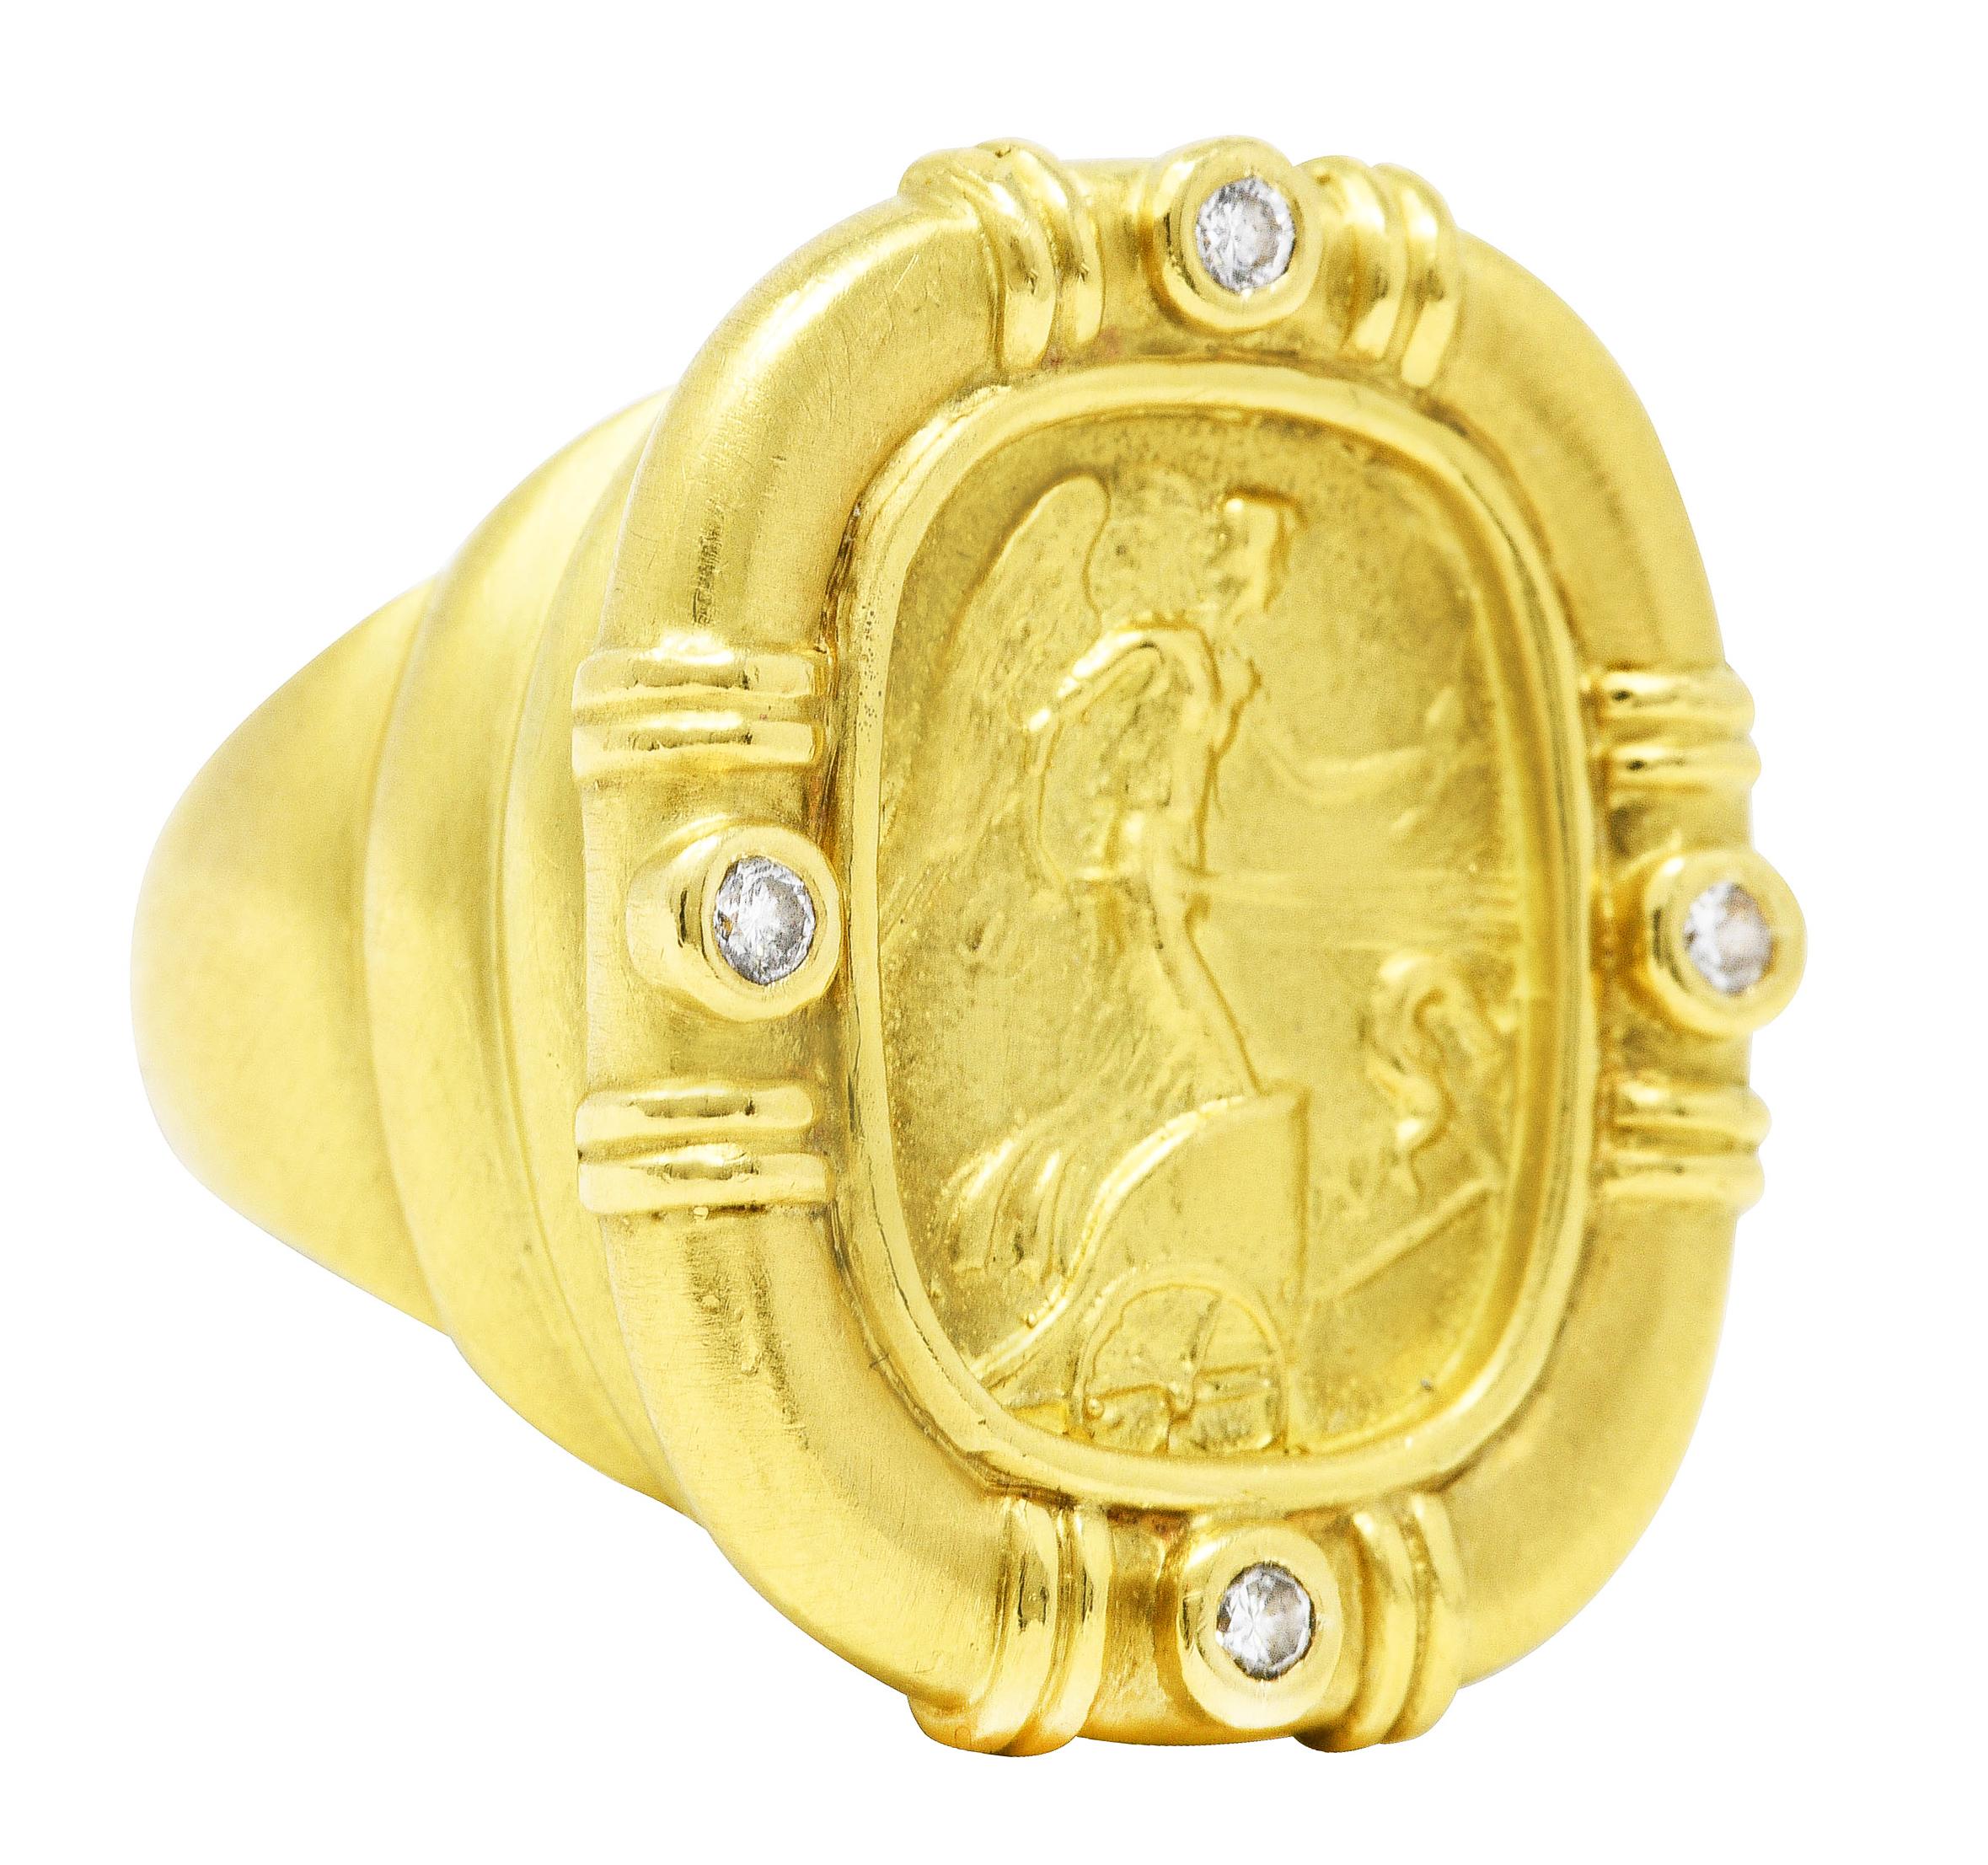 Ring centers a rectangular repoussè cameo of the winged Greek figure Nike atop a chariot

With fluted surround accented by bezel set round brilliant cut diamonds at cardinal points

Weighing approximately 0.12 carat total - eye clean and